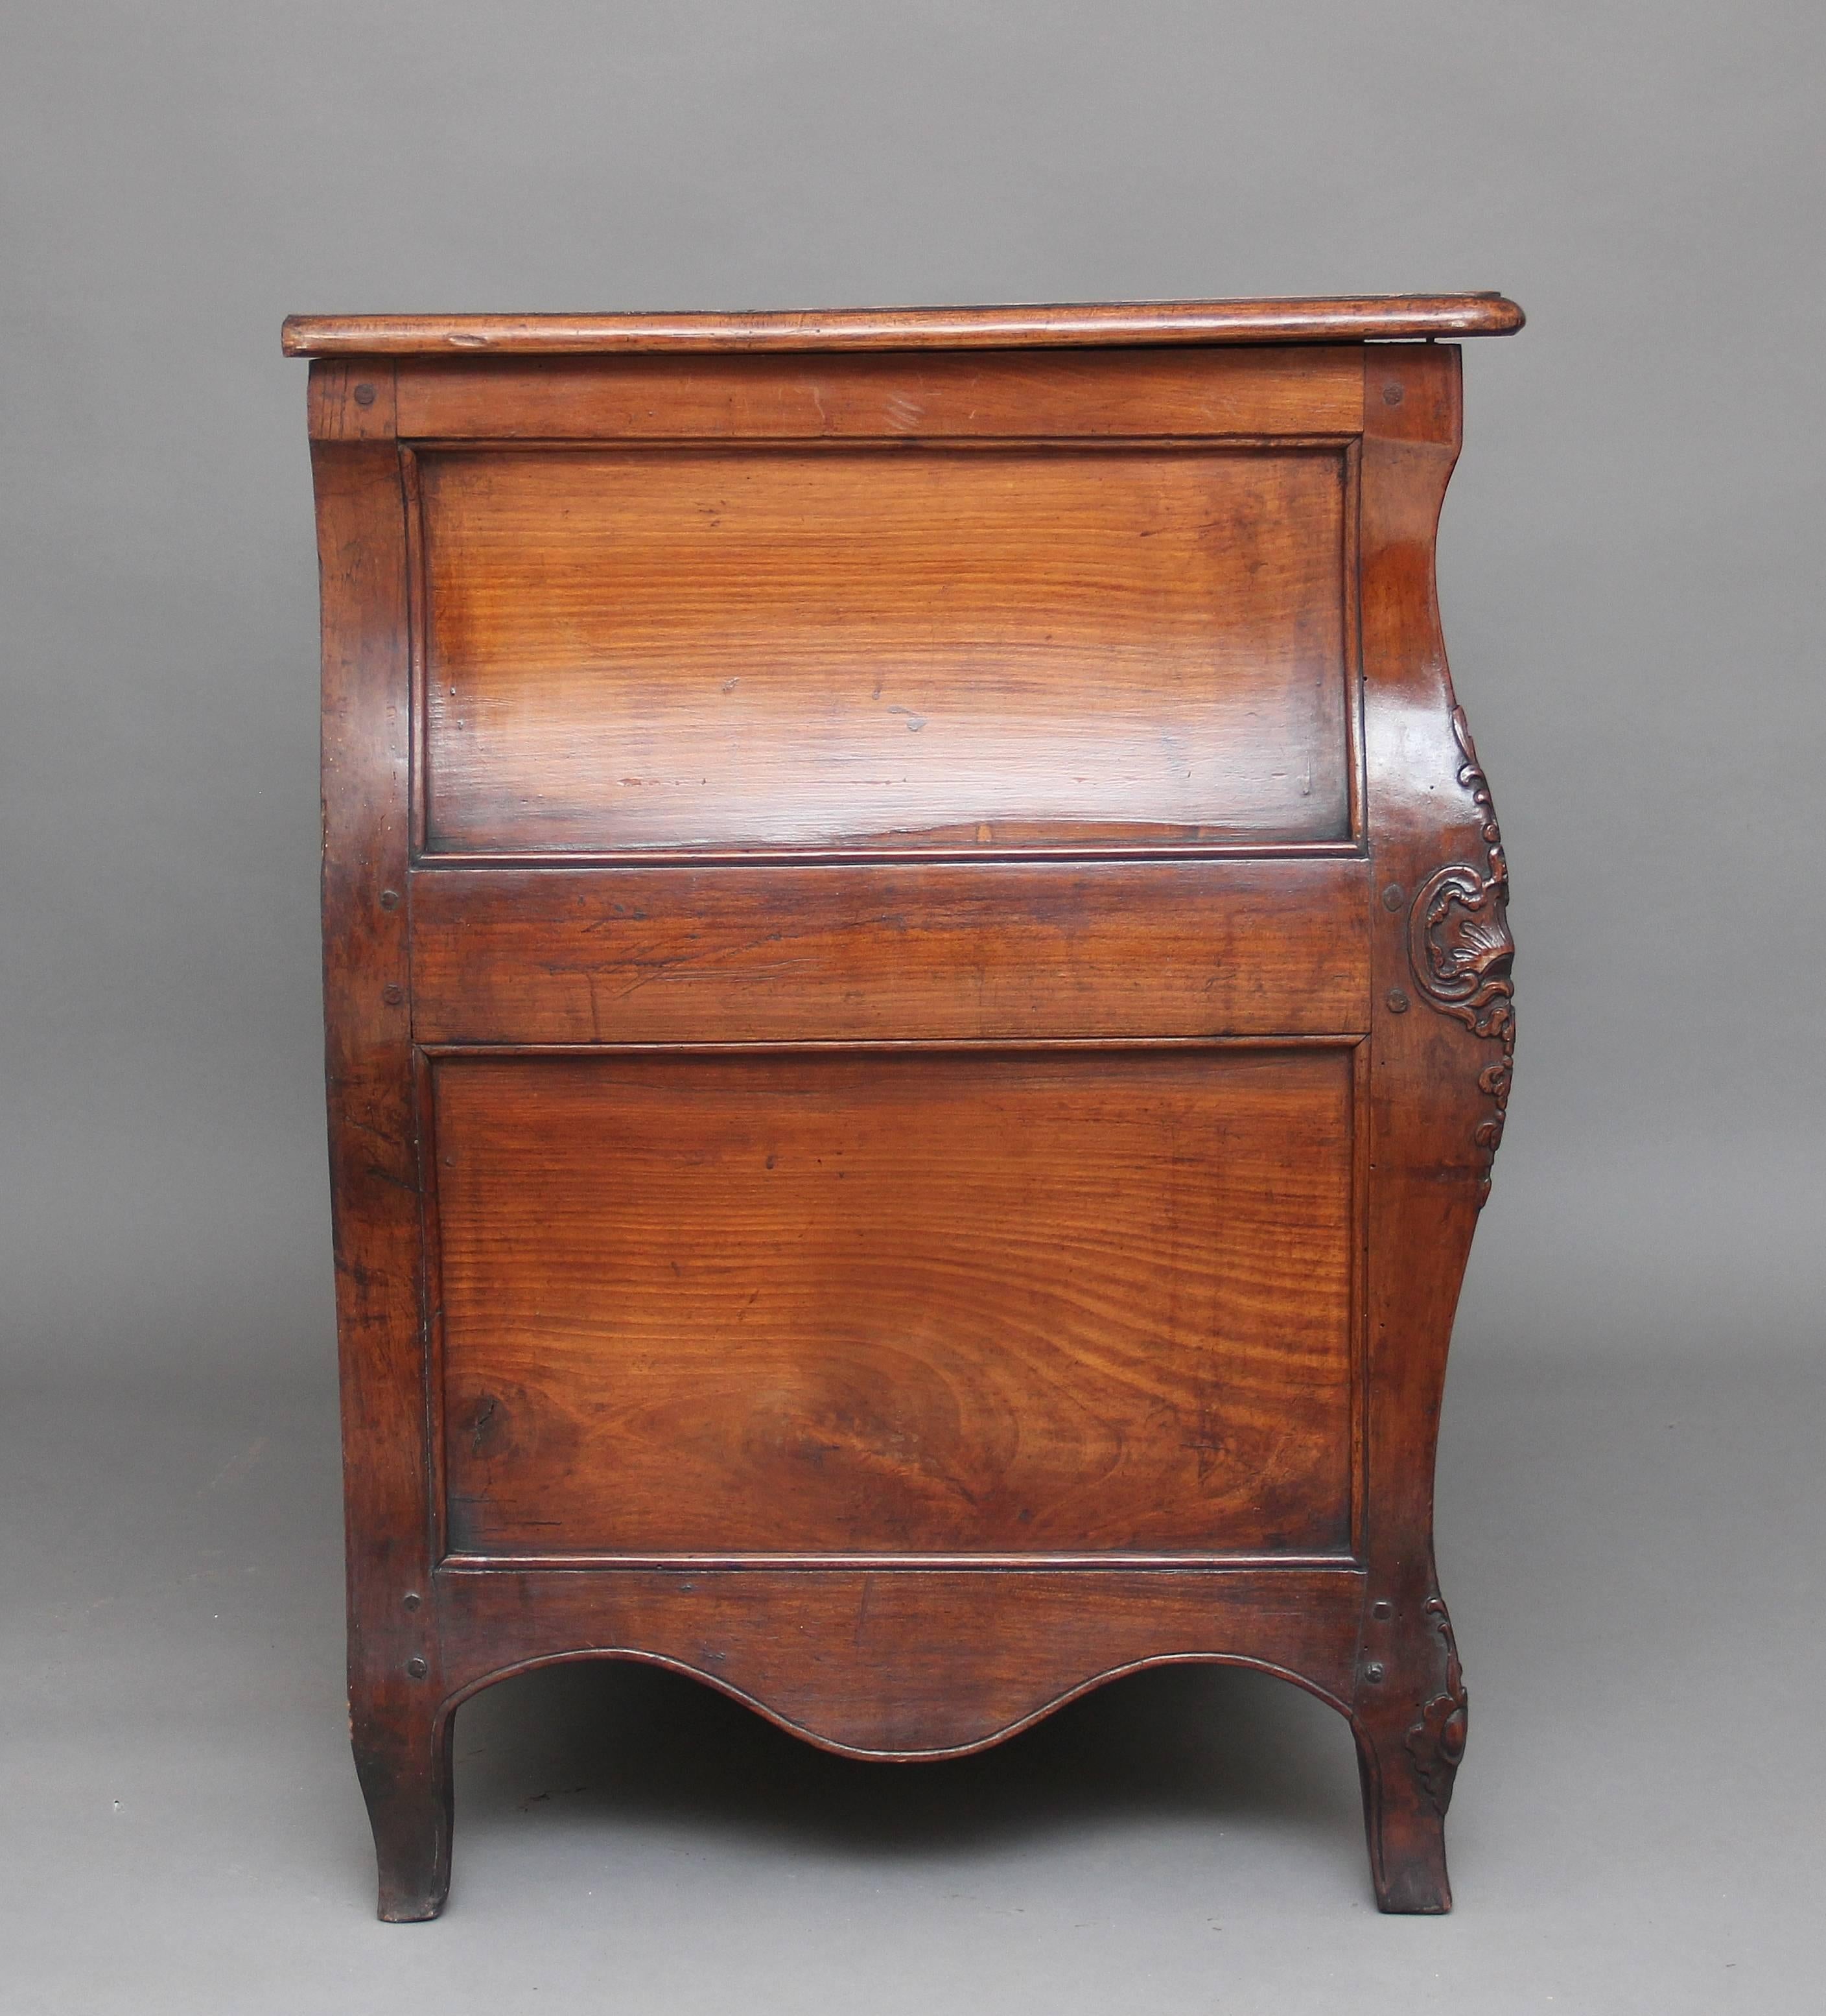 Late 18th Century 18th Century French Cherry Wood Commode